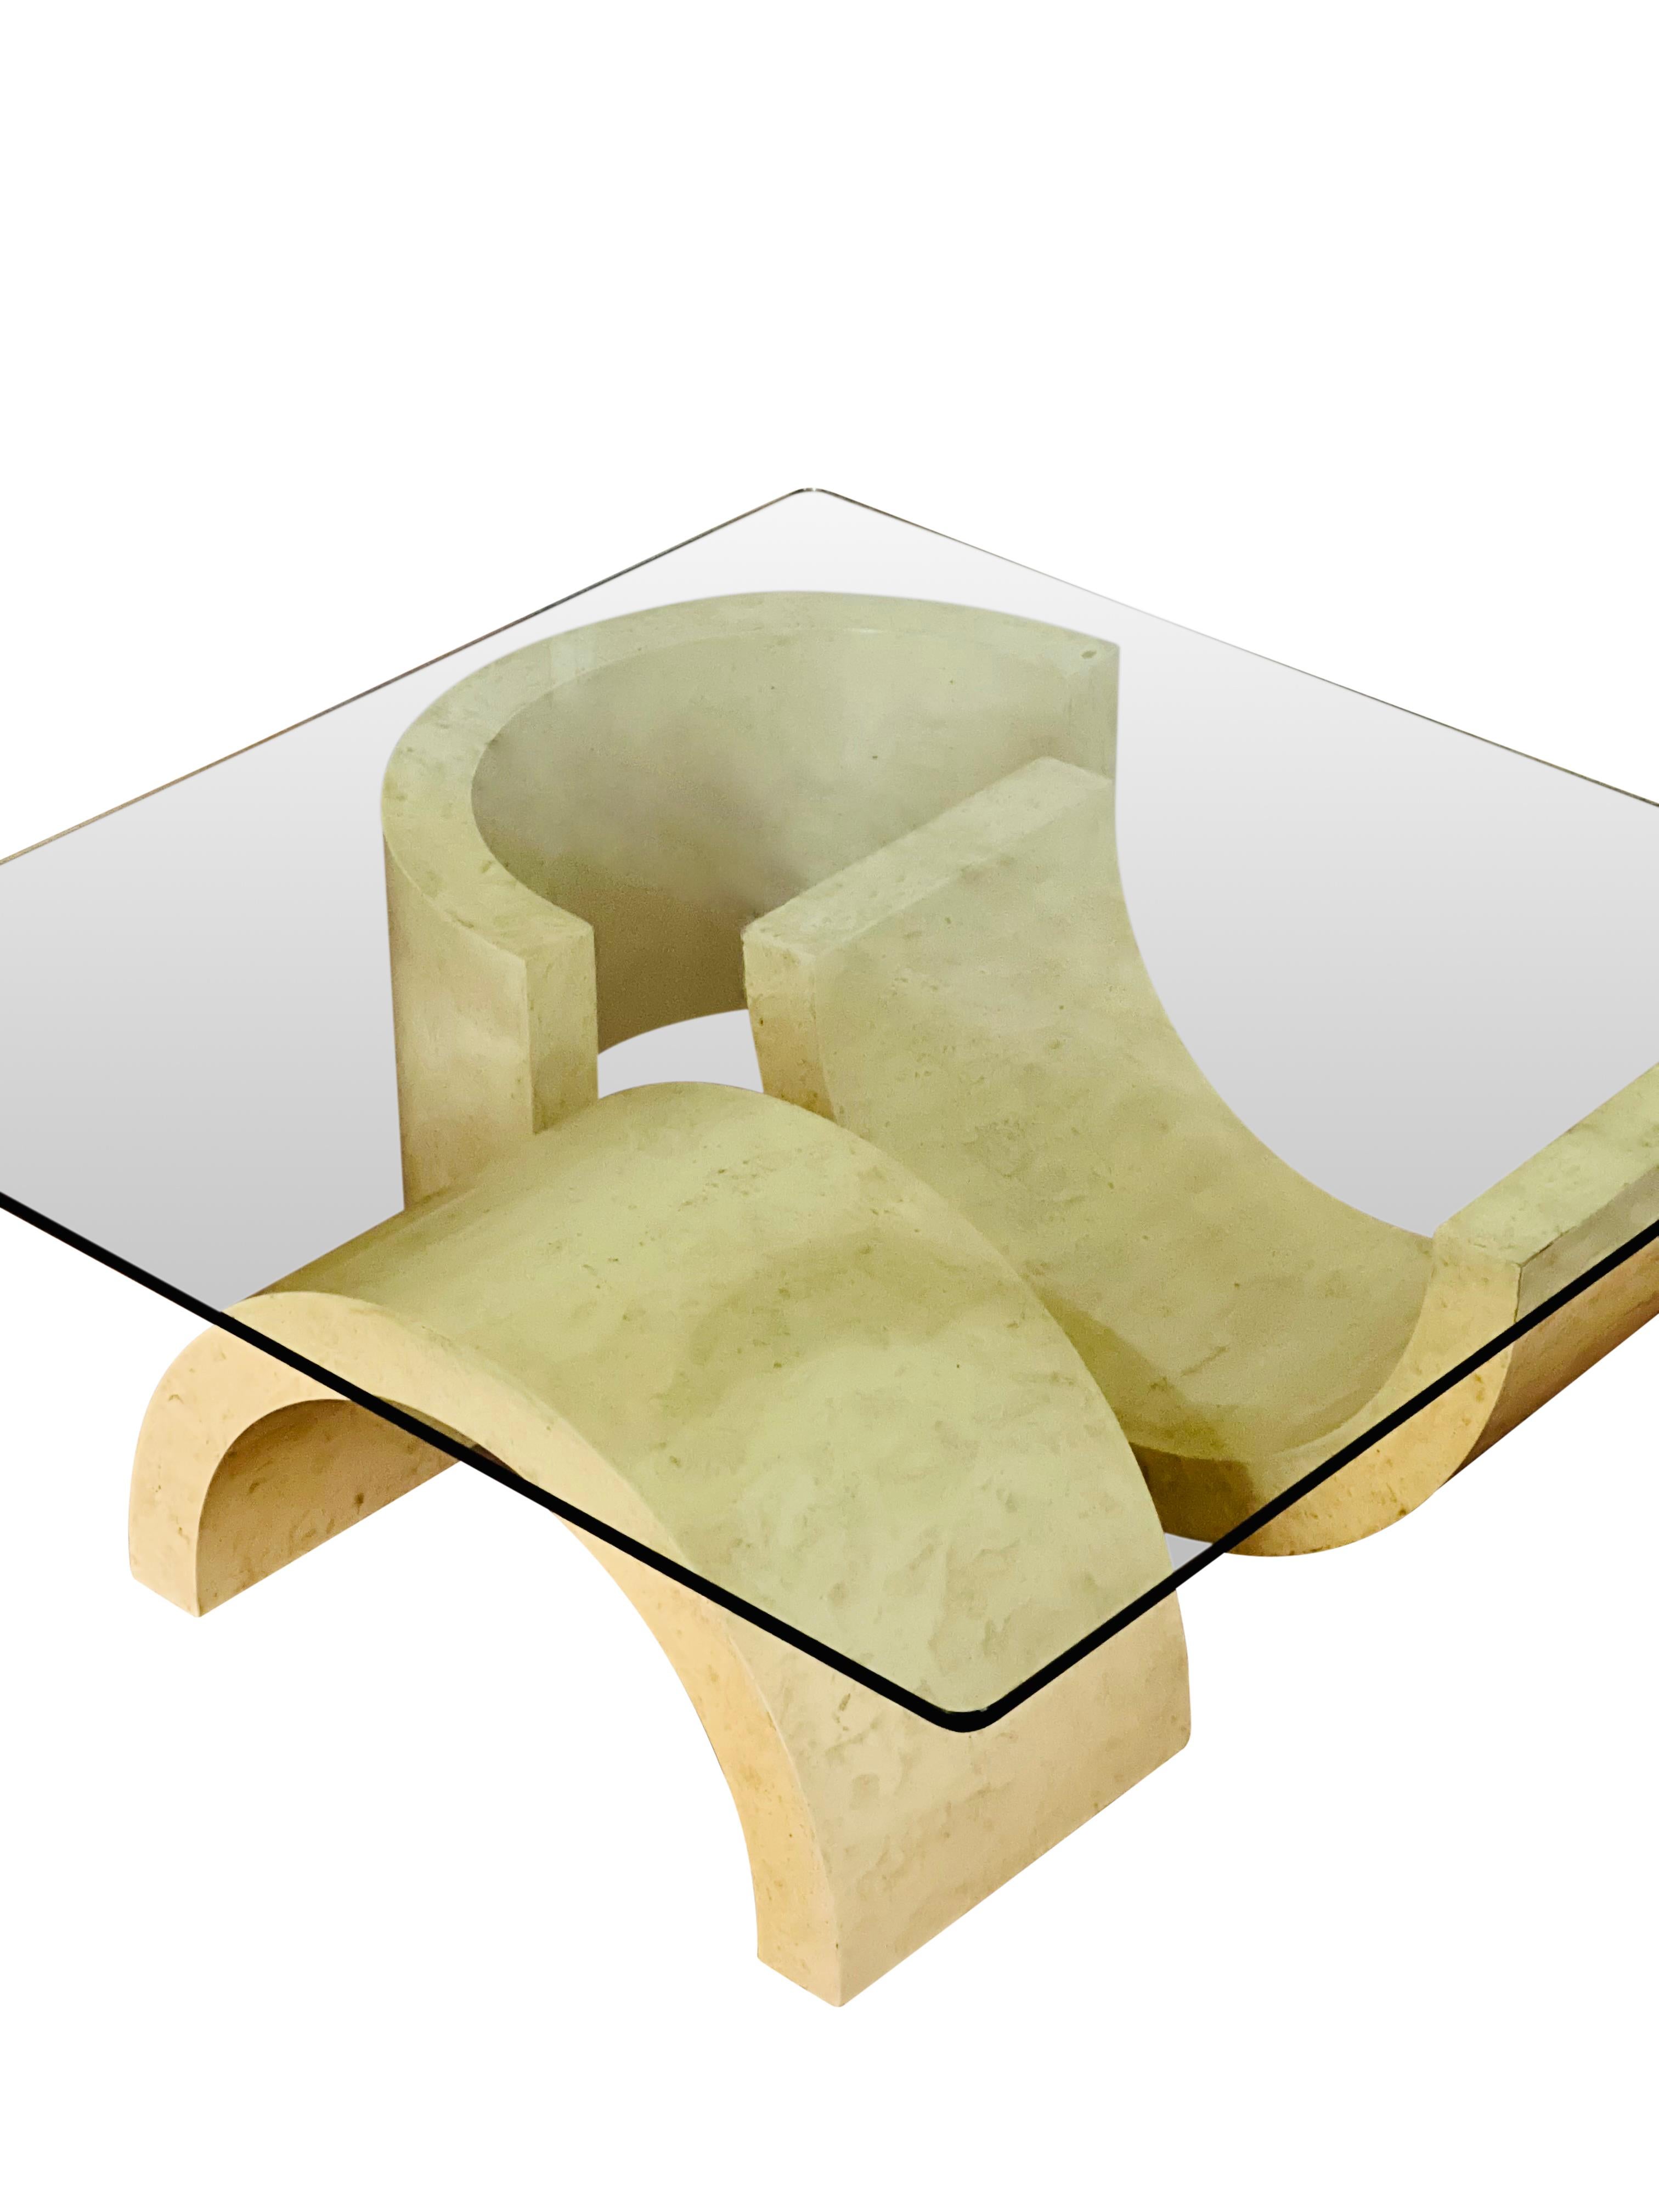 Unique custom post-modern faux stone sculptural base coffee table. 

The base is three independent pieces, each identical but intended to sit on differing angles lending depth and an artistic presentation to the table. Each one has a lightly